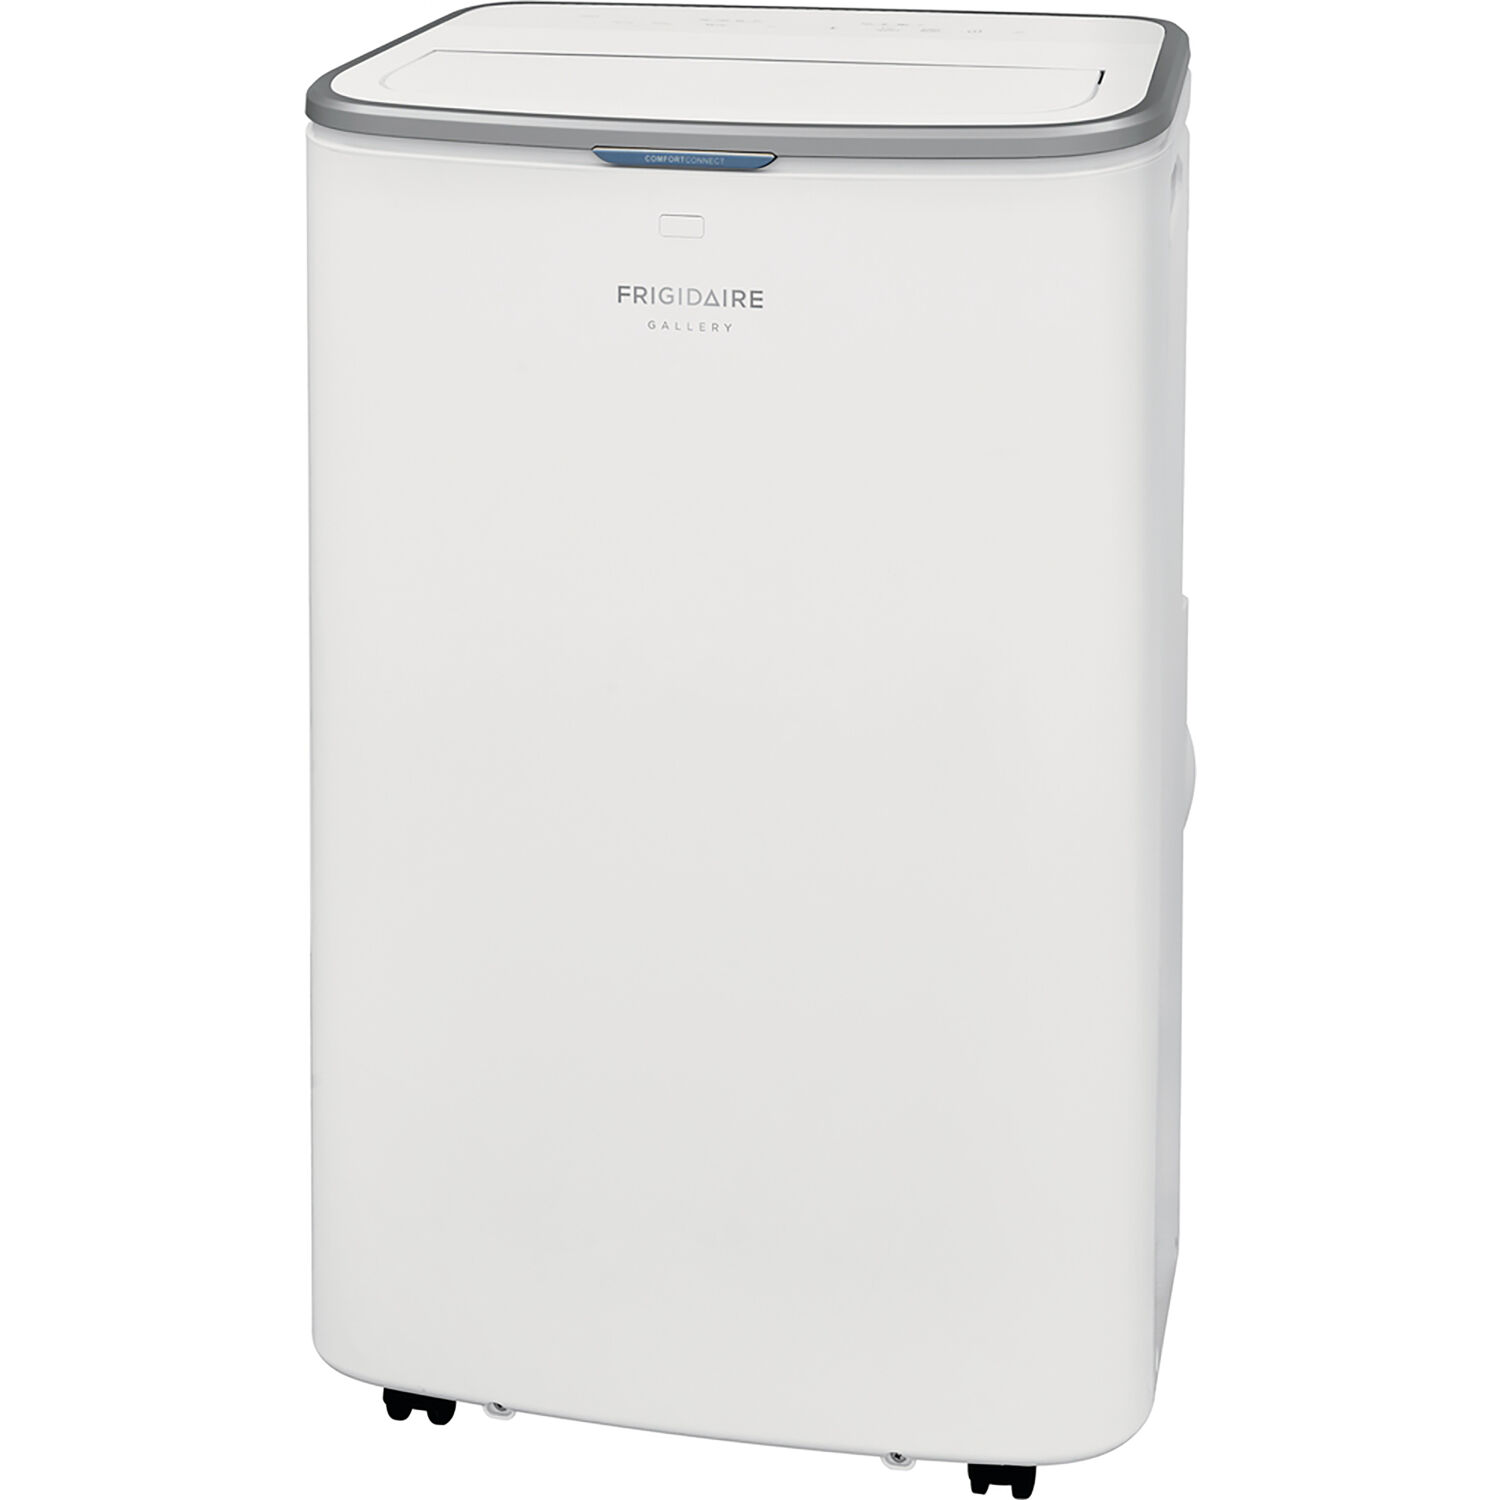 Frigidaire Cool Connect Smart Portable Air Conditioner with Wi-Fi Control for a Room up to 600-Sq. Ft. - image 6 of 14